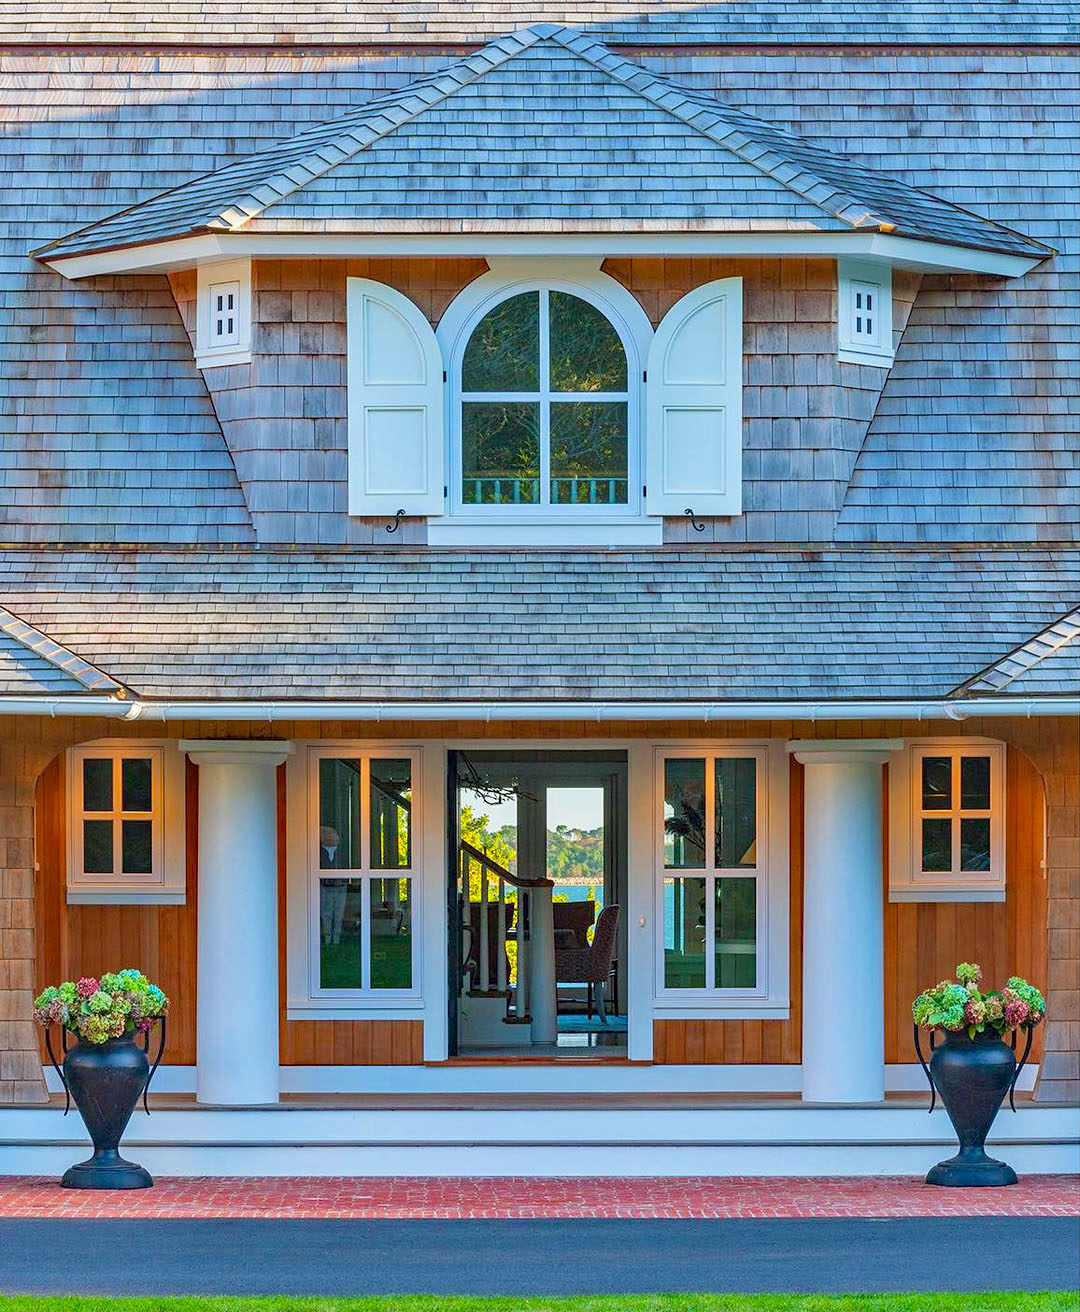 Entry Porch with Stout Columns